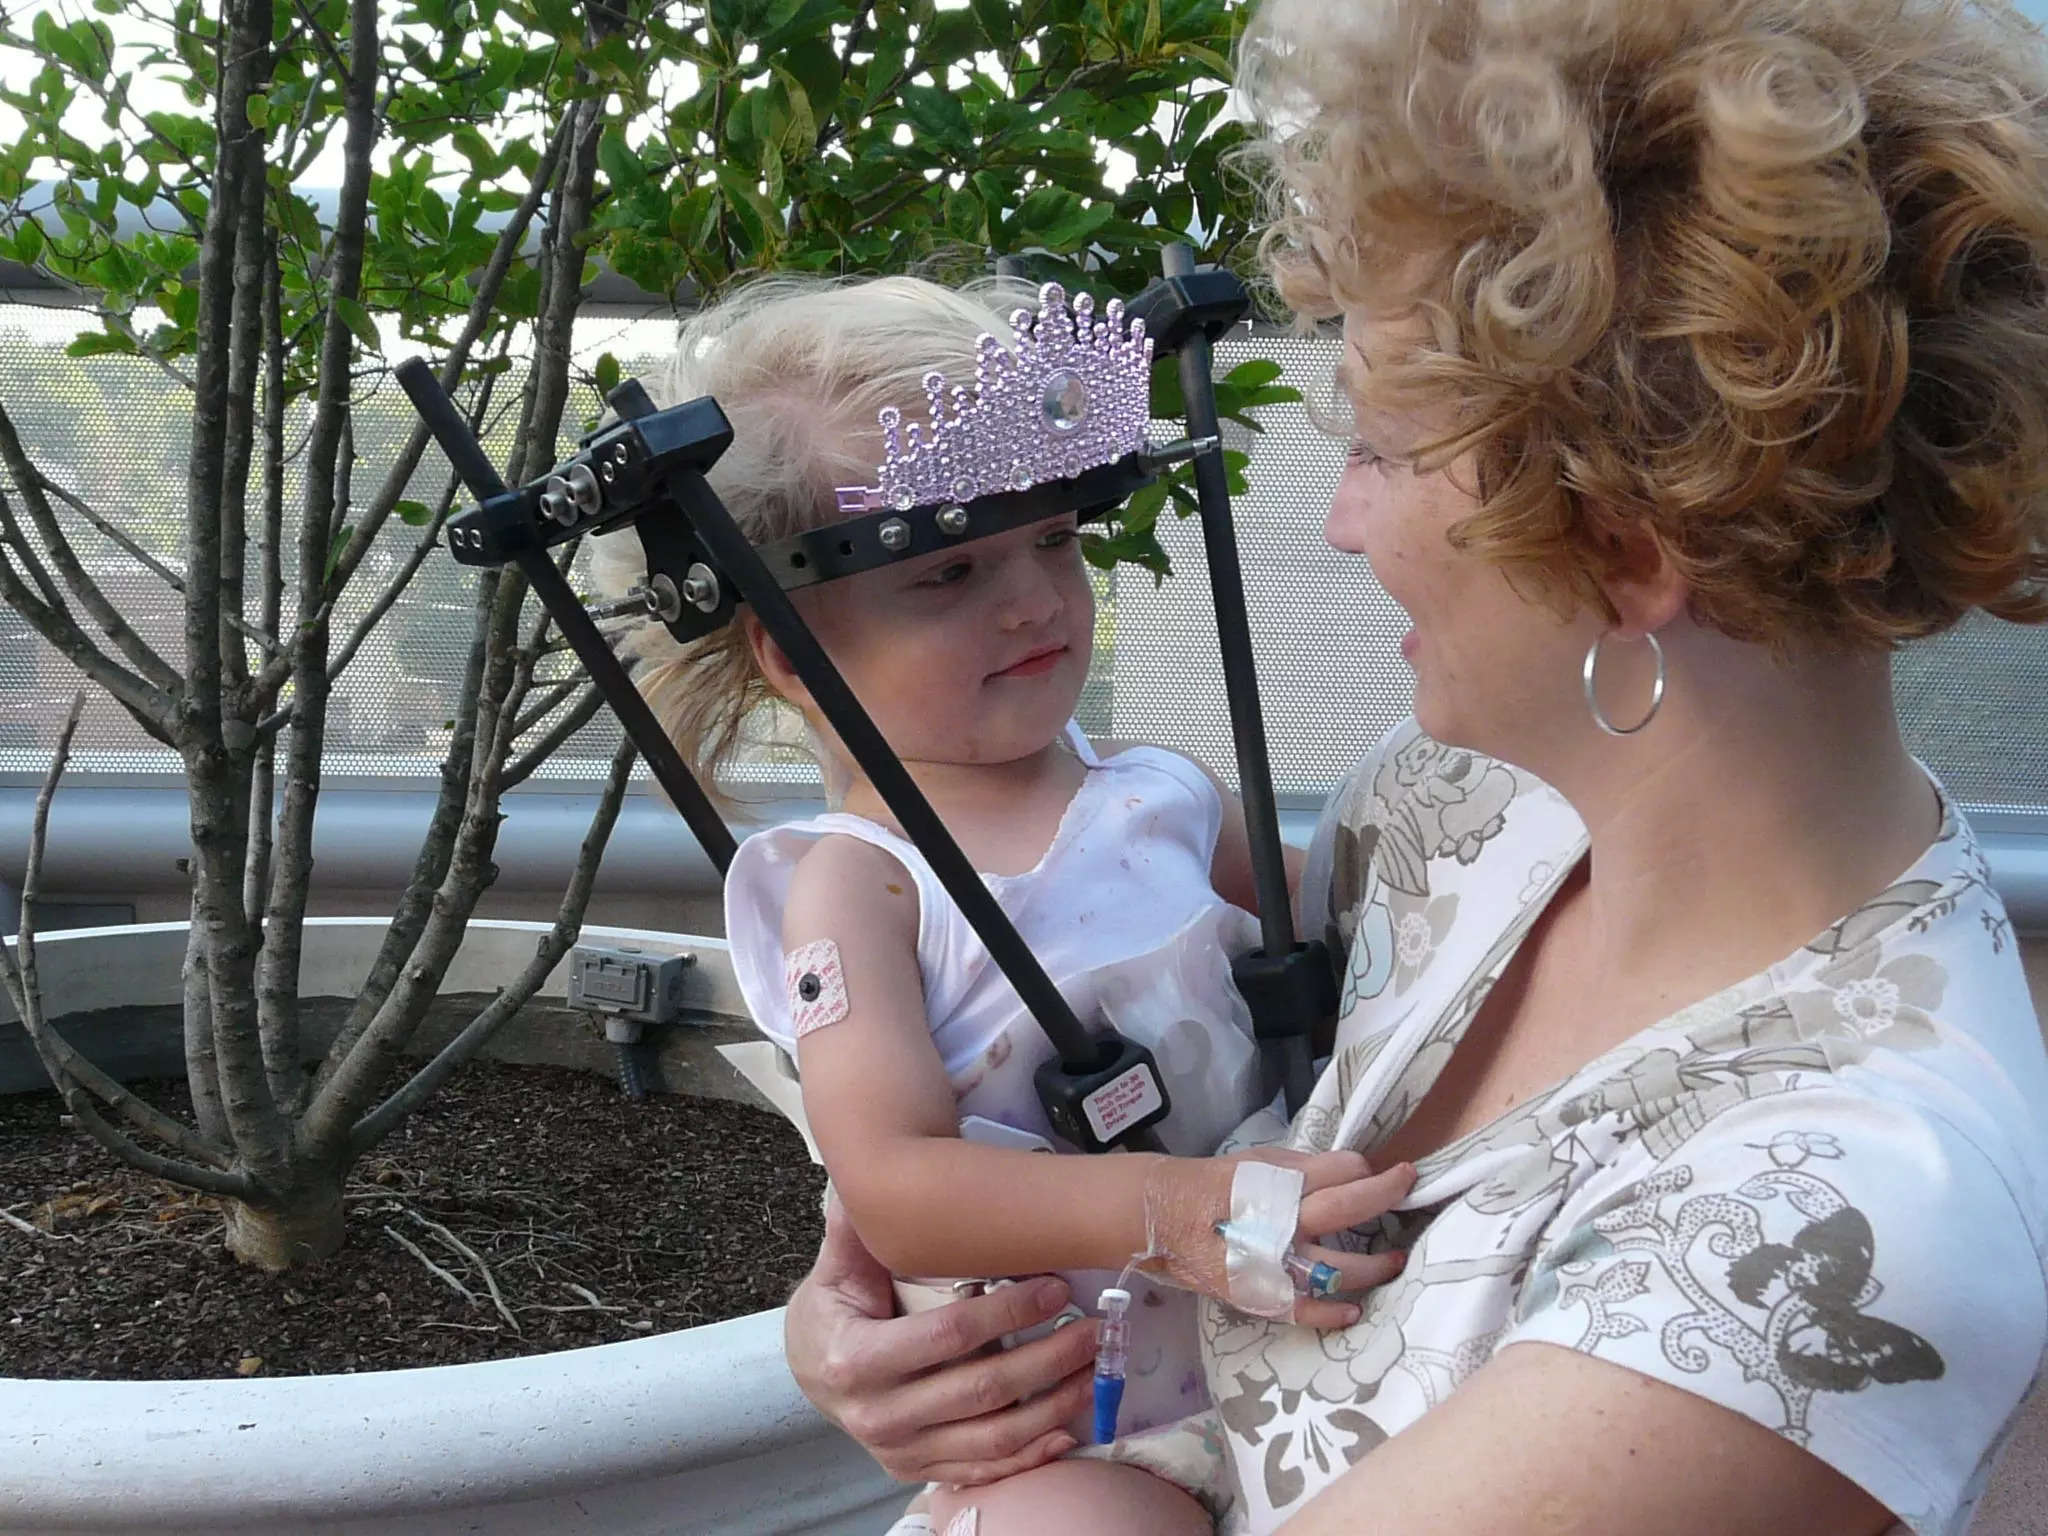 Ava Coulter as a toddler wearing her halo brace. She is being carried by her mother, Tammy Coulter